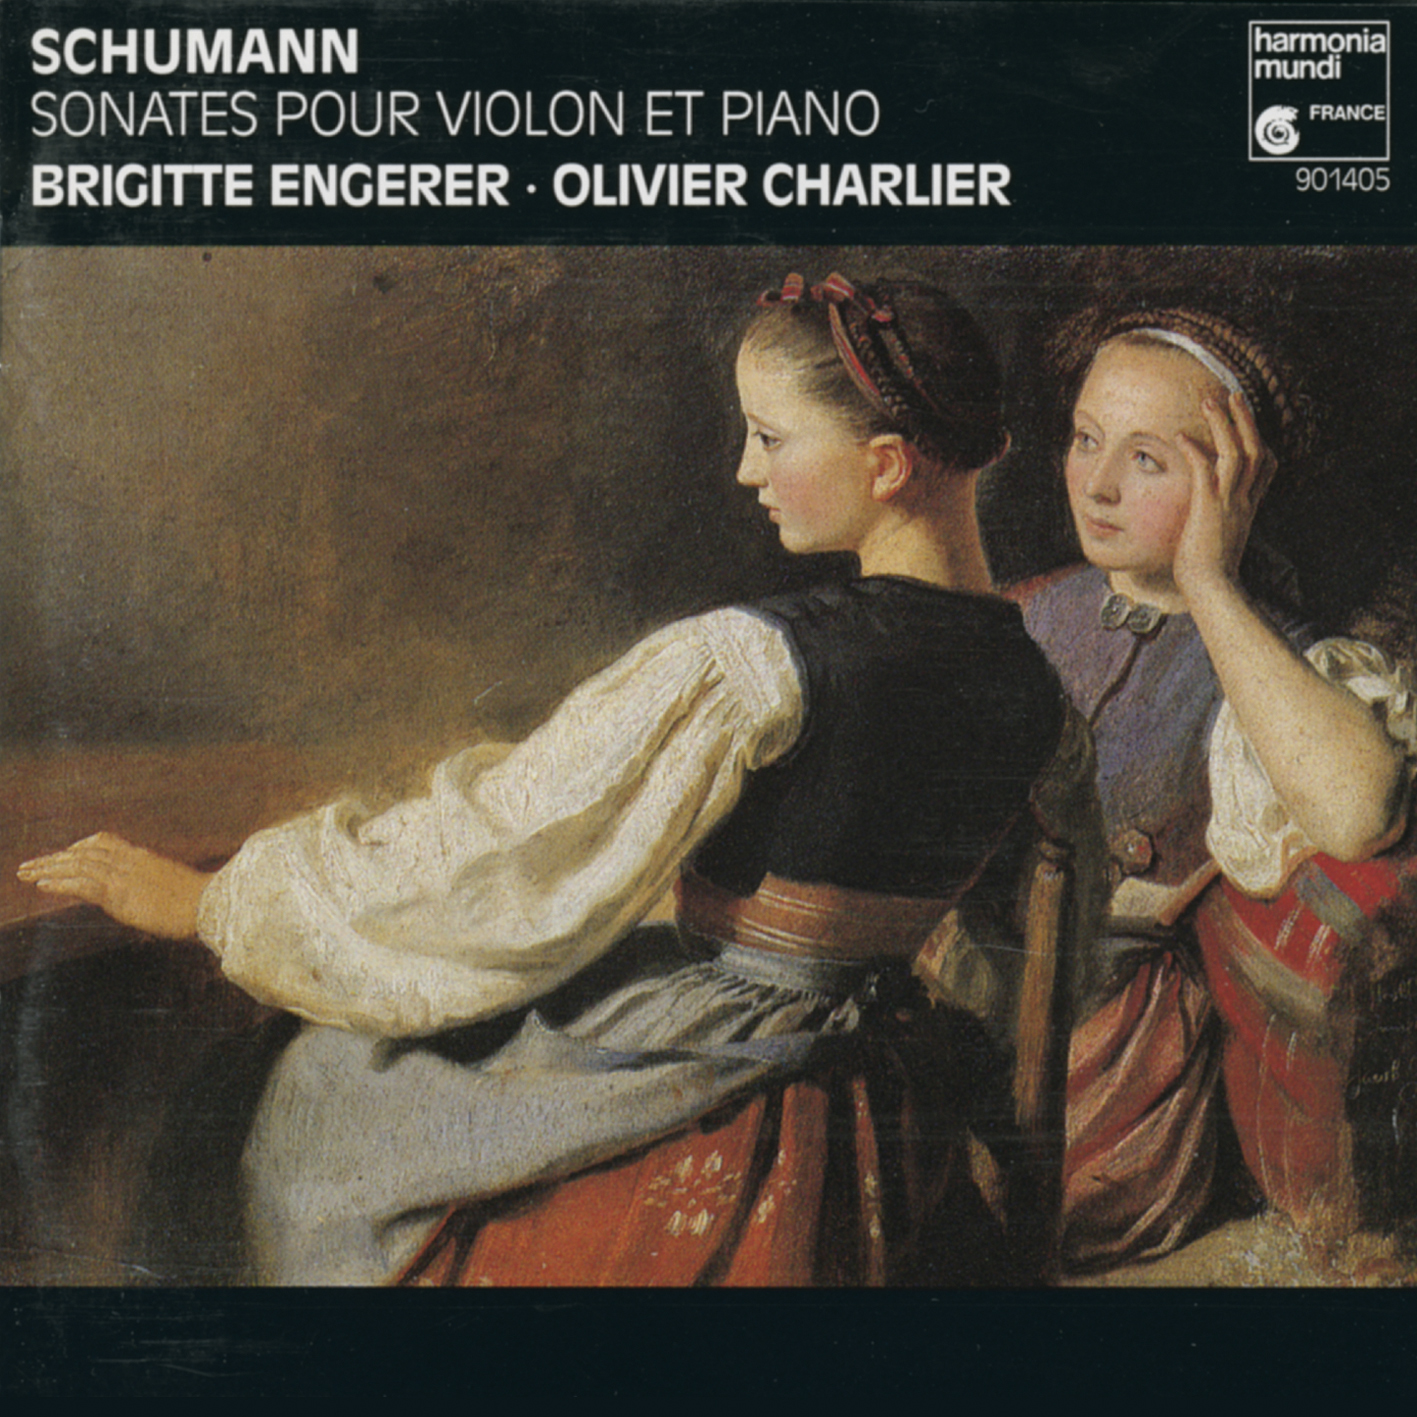 Three Romances for violin and piano, Op. 94: III. Nicht schnell